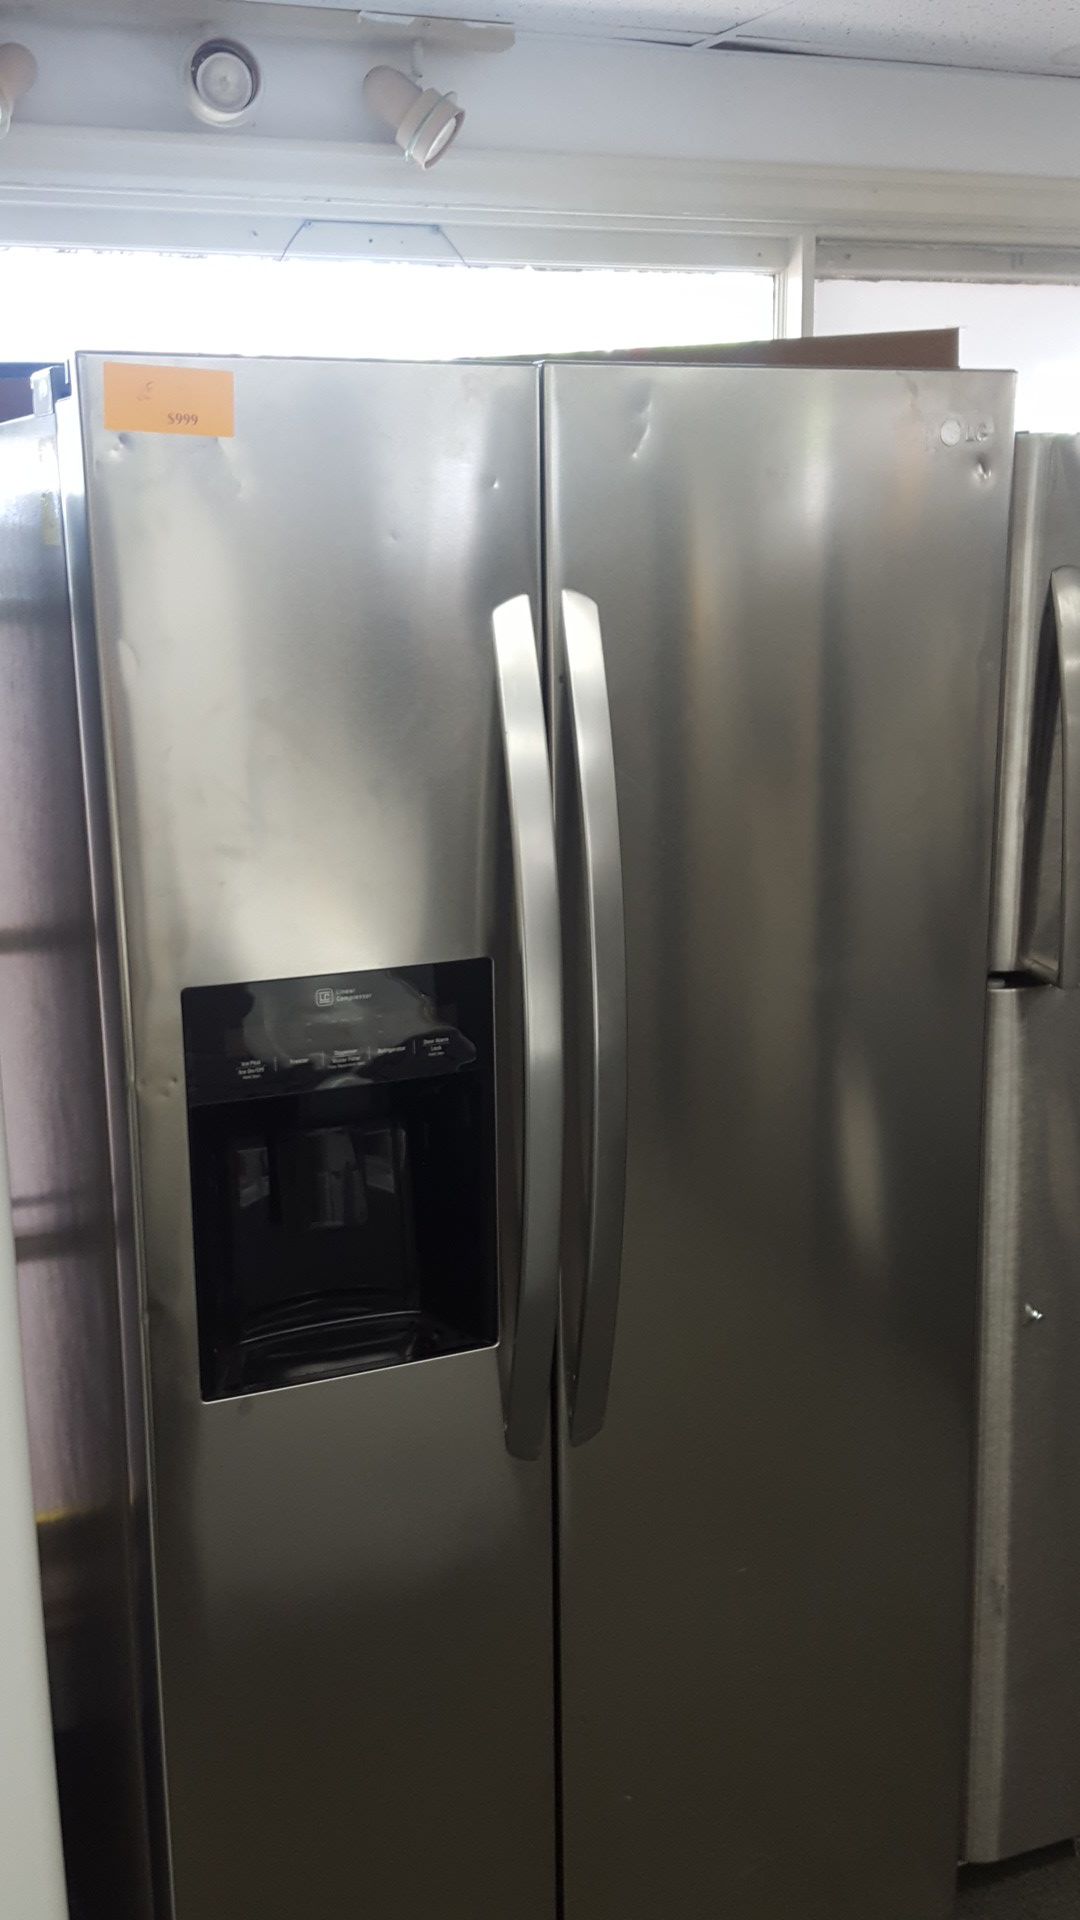 LG scratch and dent refrigerator side by side